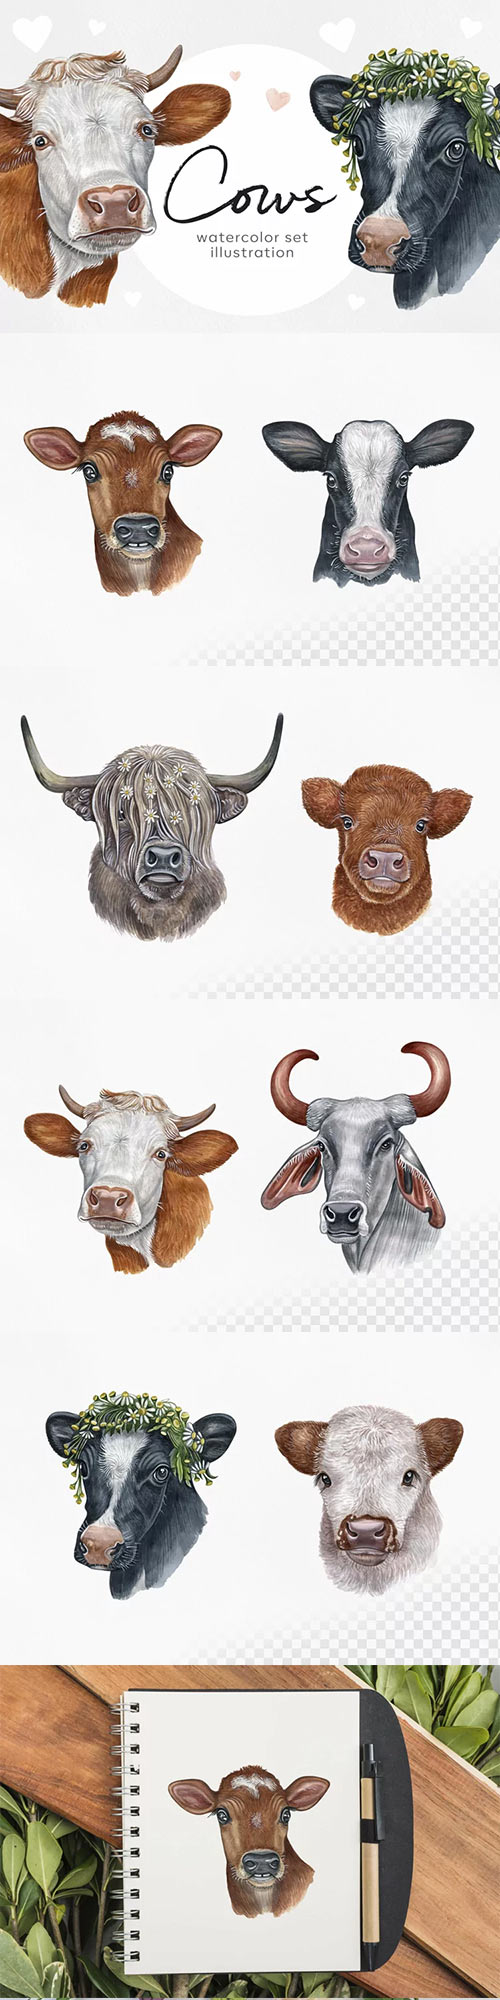 Watercolor set cute cows illustrations. 8 cow/ox 912257